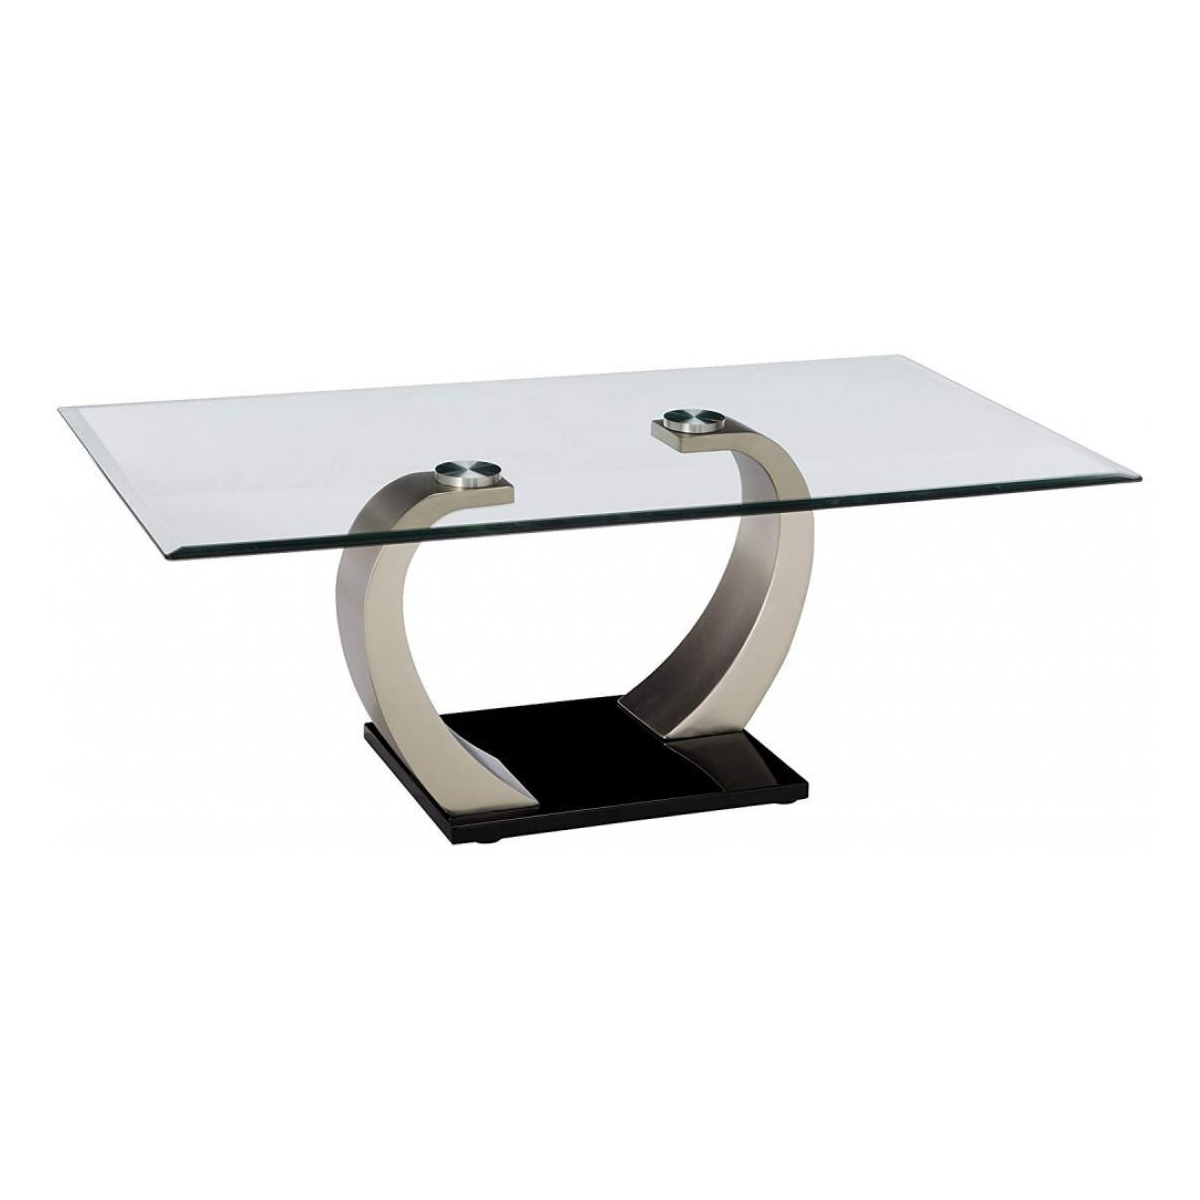 Rectangular Glass Top Coffee Table With Pedestal Base,Black And Silver- Saltoro Sherpi